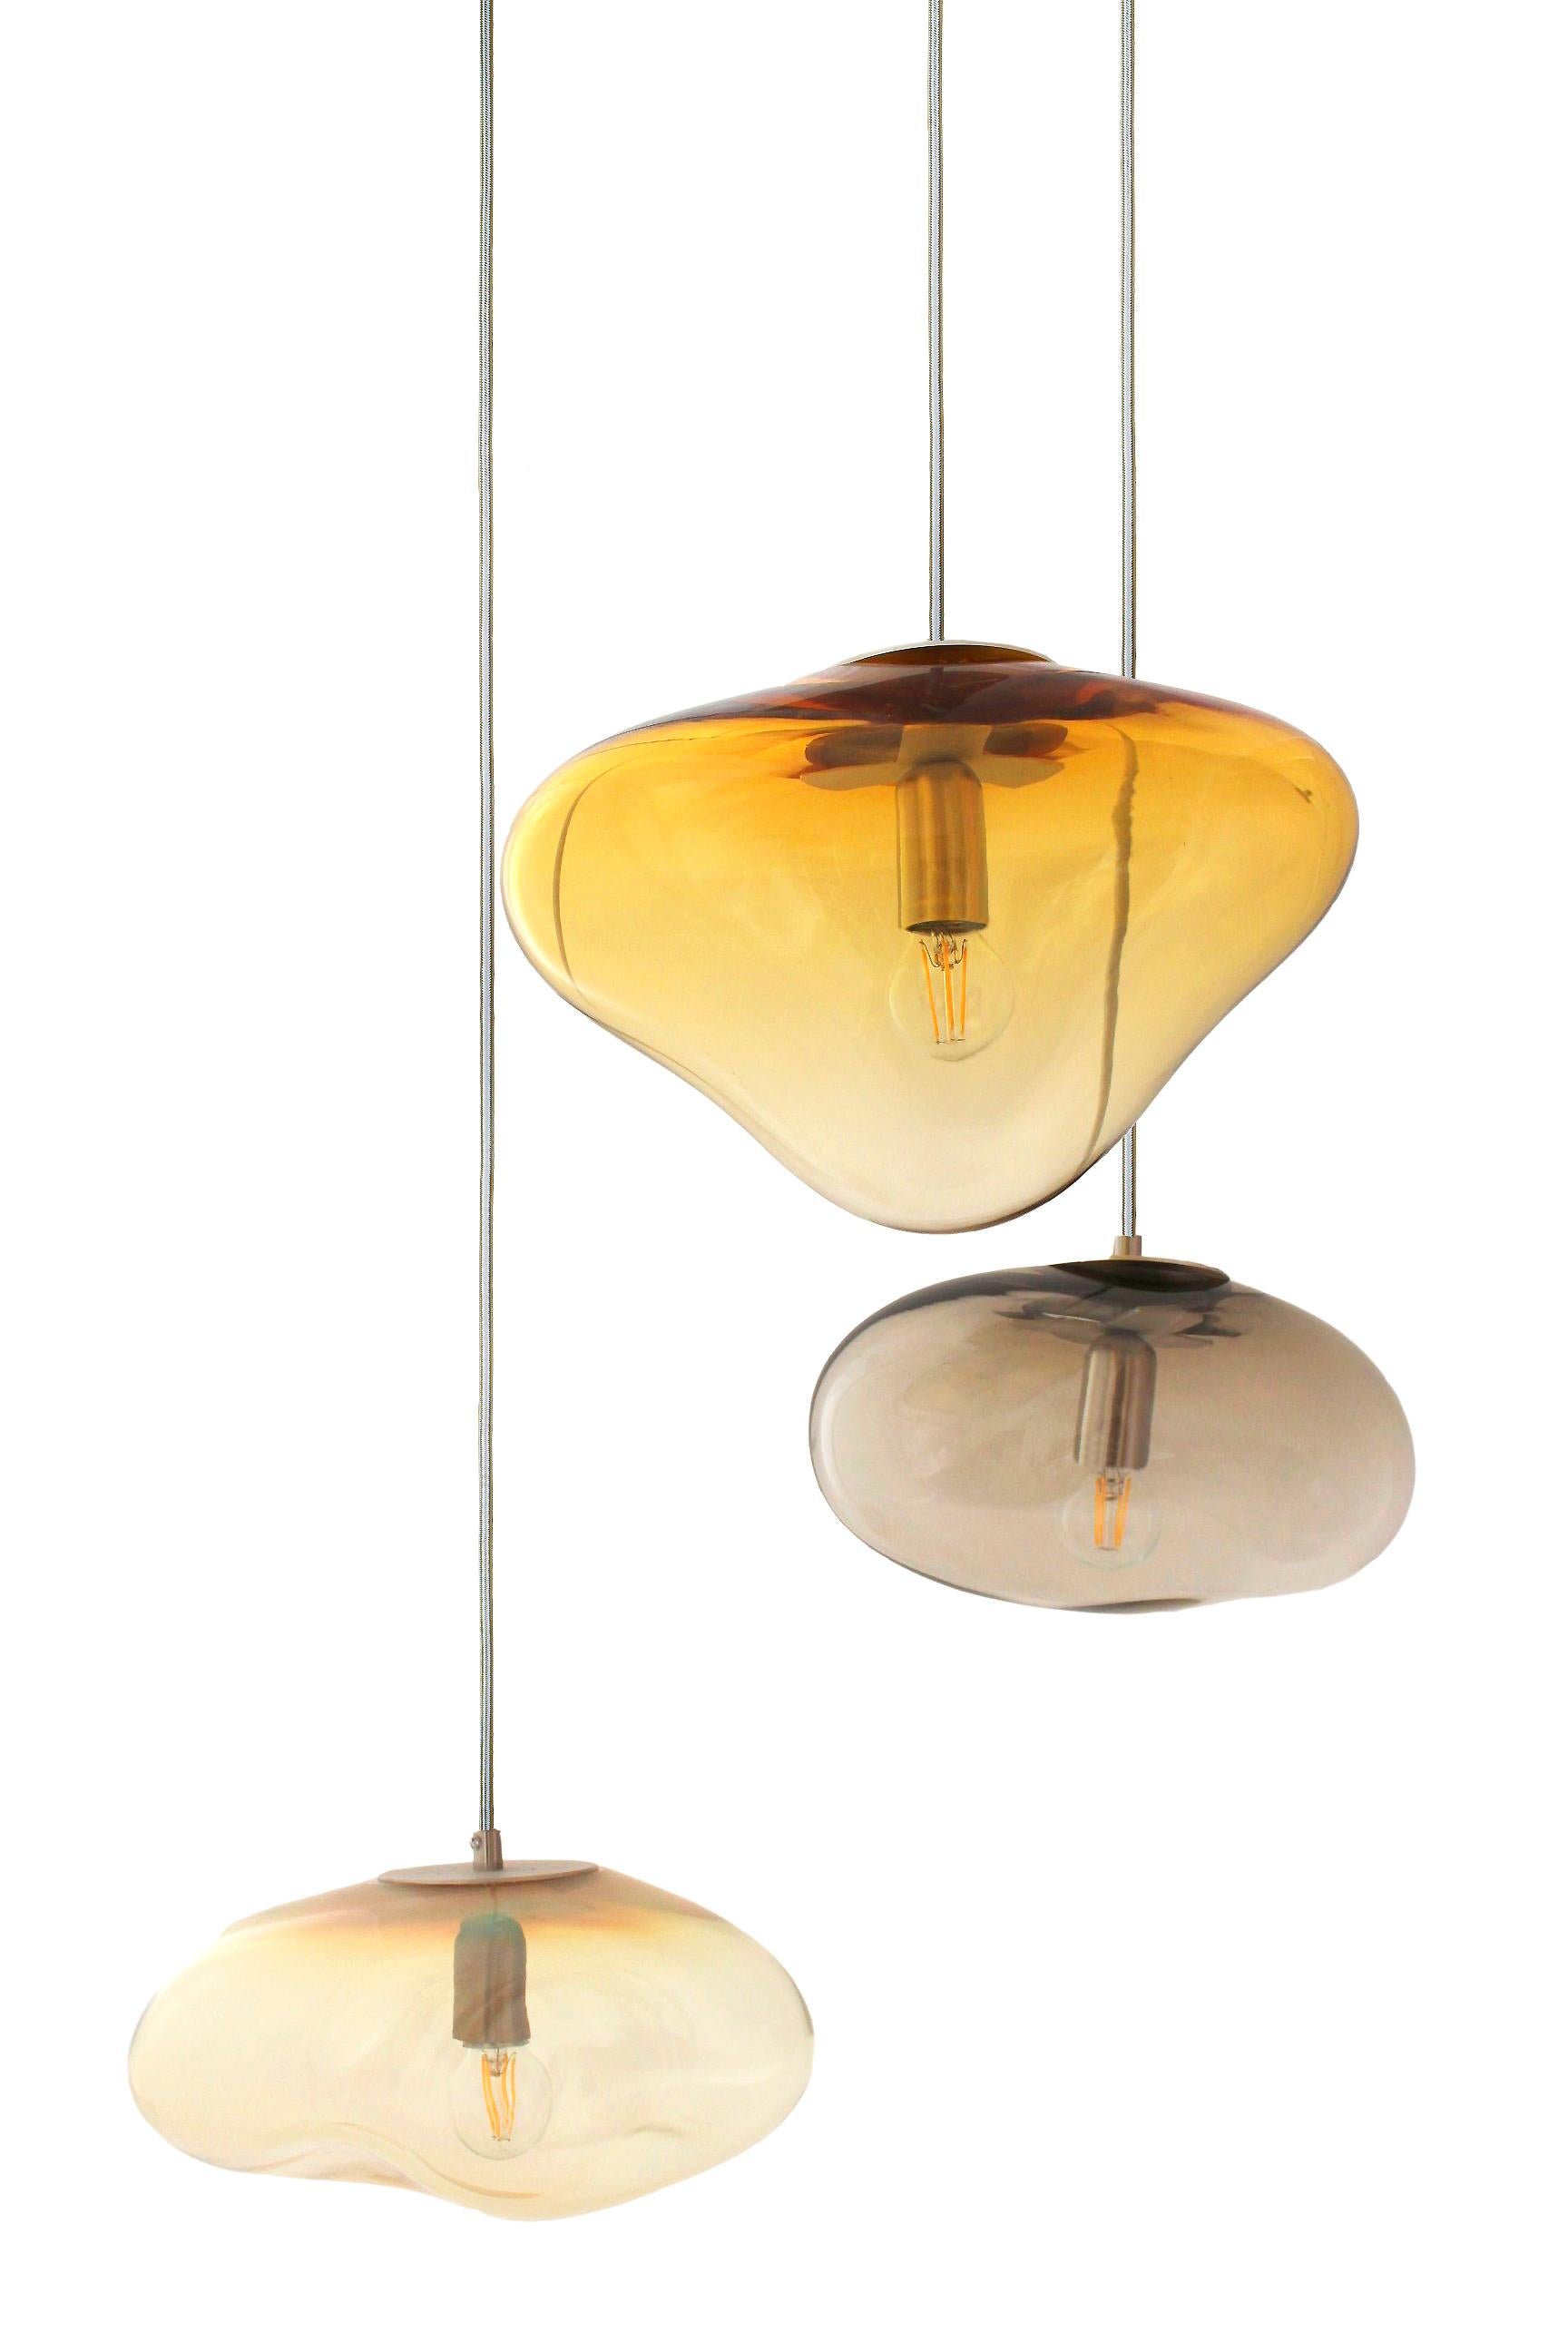 Set of 3 planetoide seresi gold pendants by Eloa.
No UL listed 
Material: glass, steel, silver, LED bulb
Dimensions: D30 x W30 x H250 cm
Also available in different colours and dimensions.

All our lamps can be wired according to each country. If